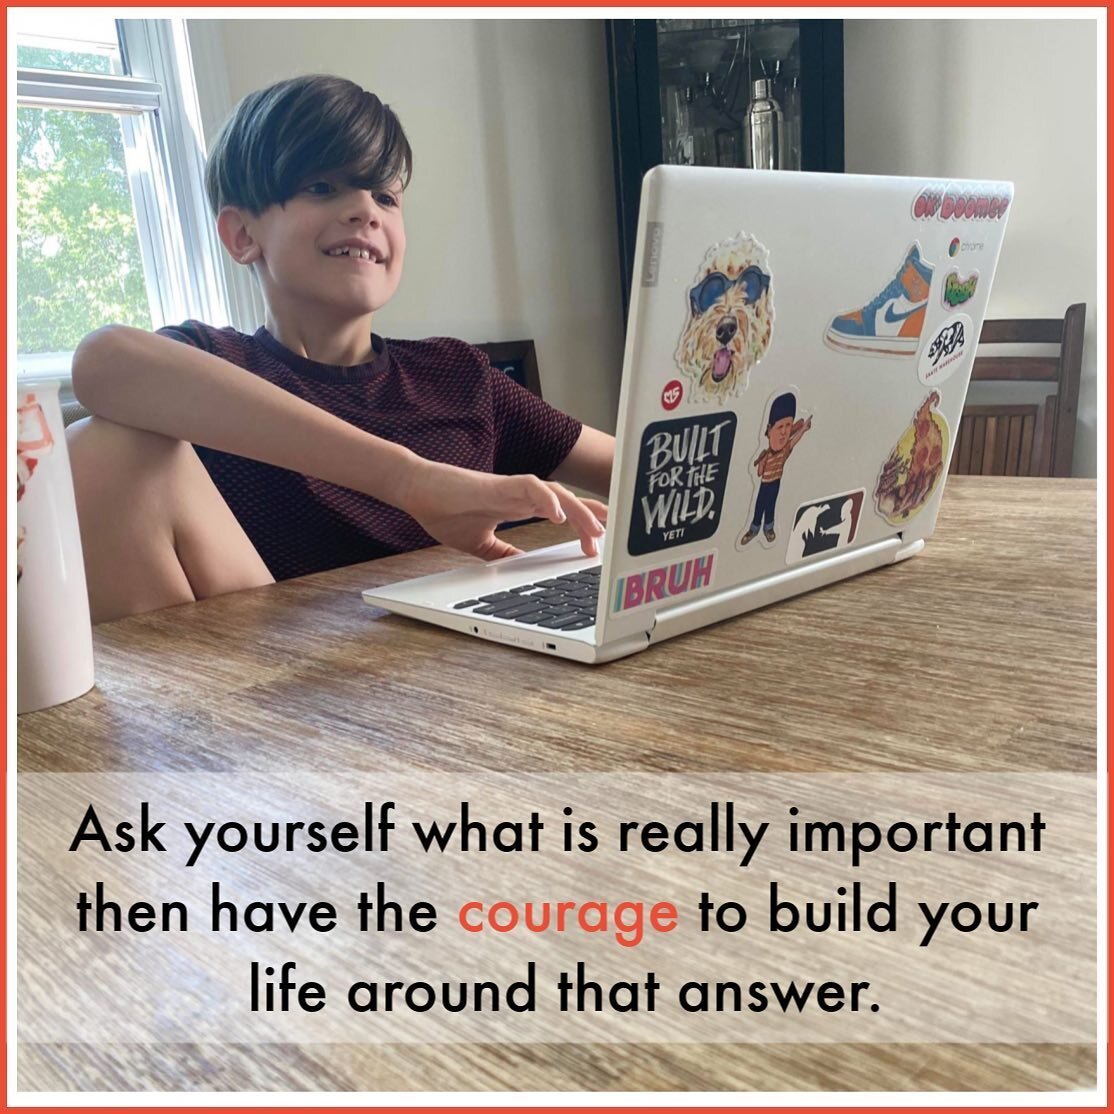 How is this pandemic shifting your priorities for your life?  Over here at my house I became a homeschool teacher (never saw that coming!) and have been learning that role for the last few months -- not easy!! Teachers are a very special breed.  I'll